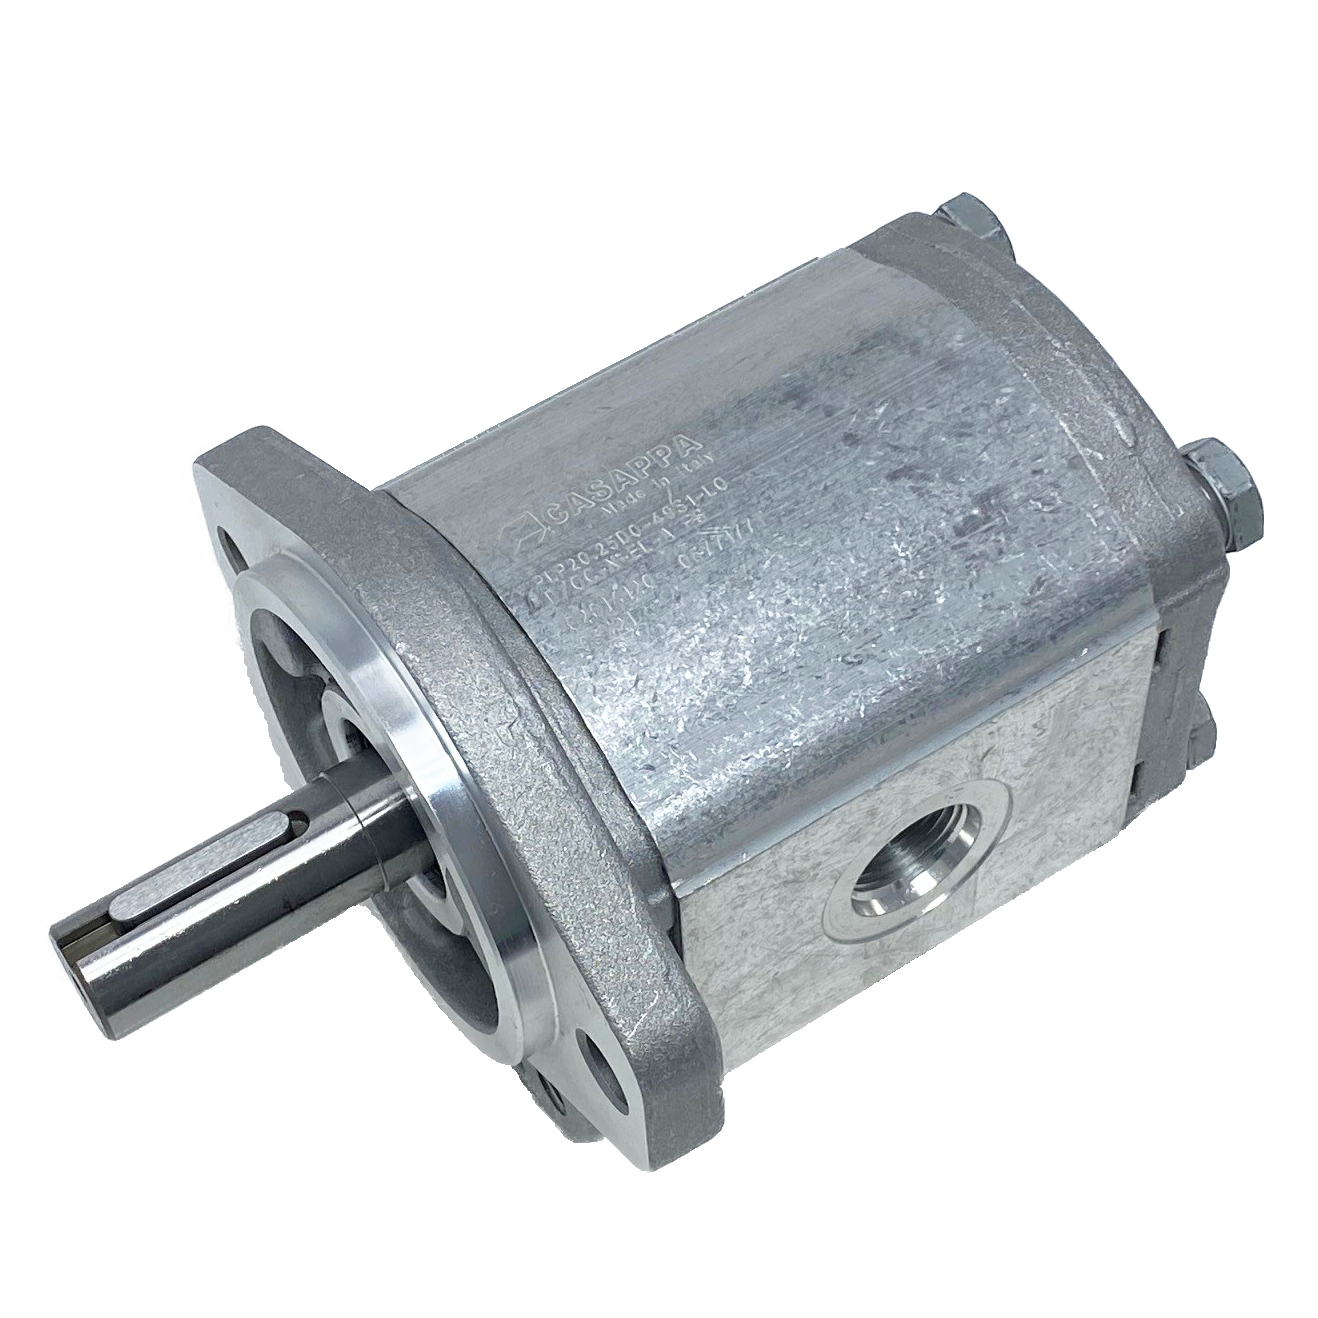 PHP20.27,8S0-49S9-LOG/OC-N-EL : Casappa Polaris Gear Pump, 28.21cc, 2900psi Rated, 2500RPM, CCW, 3/4" Bore x 3/16" Key Shaft, SAE A 2-Bolt Flange, 1.25" #20 SAE Inlet, 0.625 (5/8") #10 SAE Outlet, Cast Iron Body, Aluminum Flange